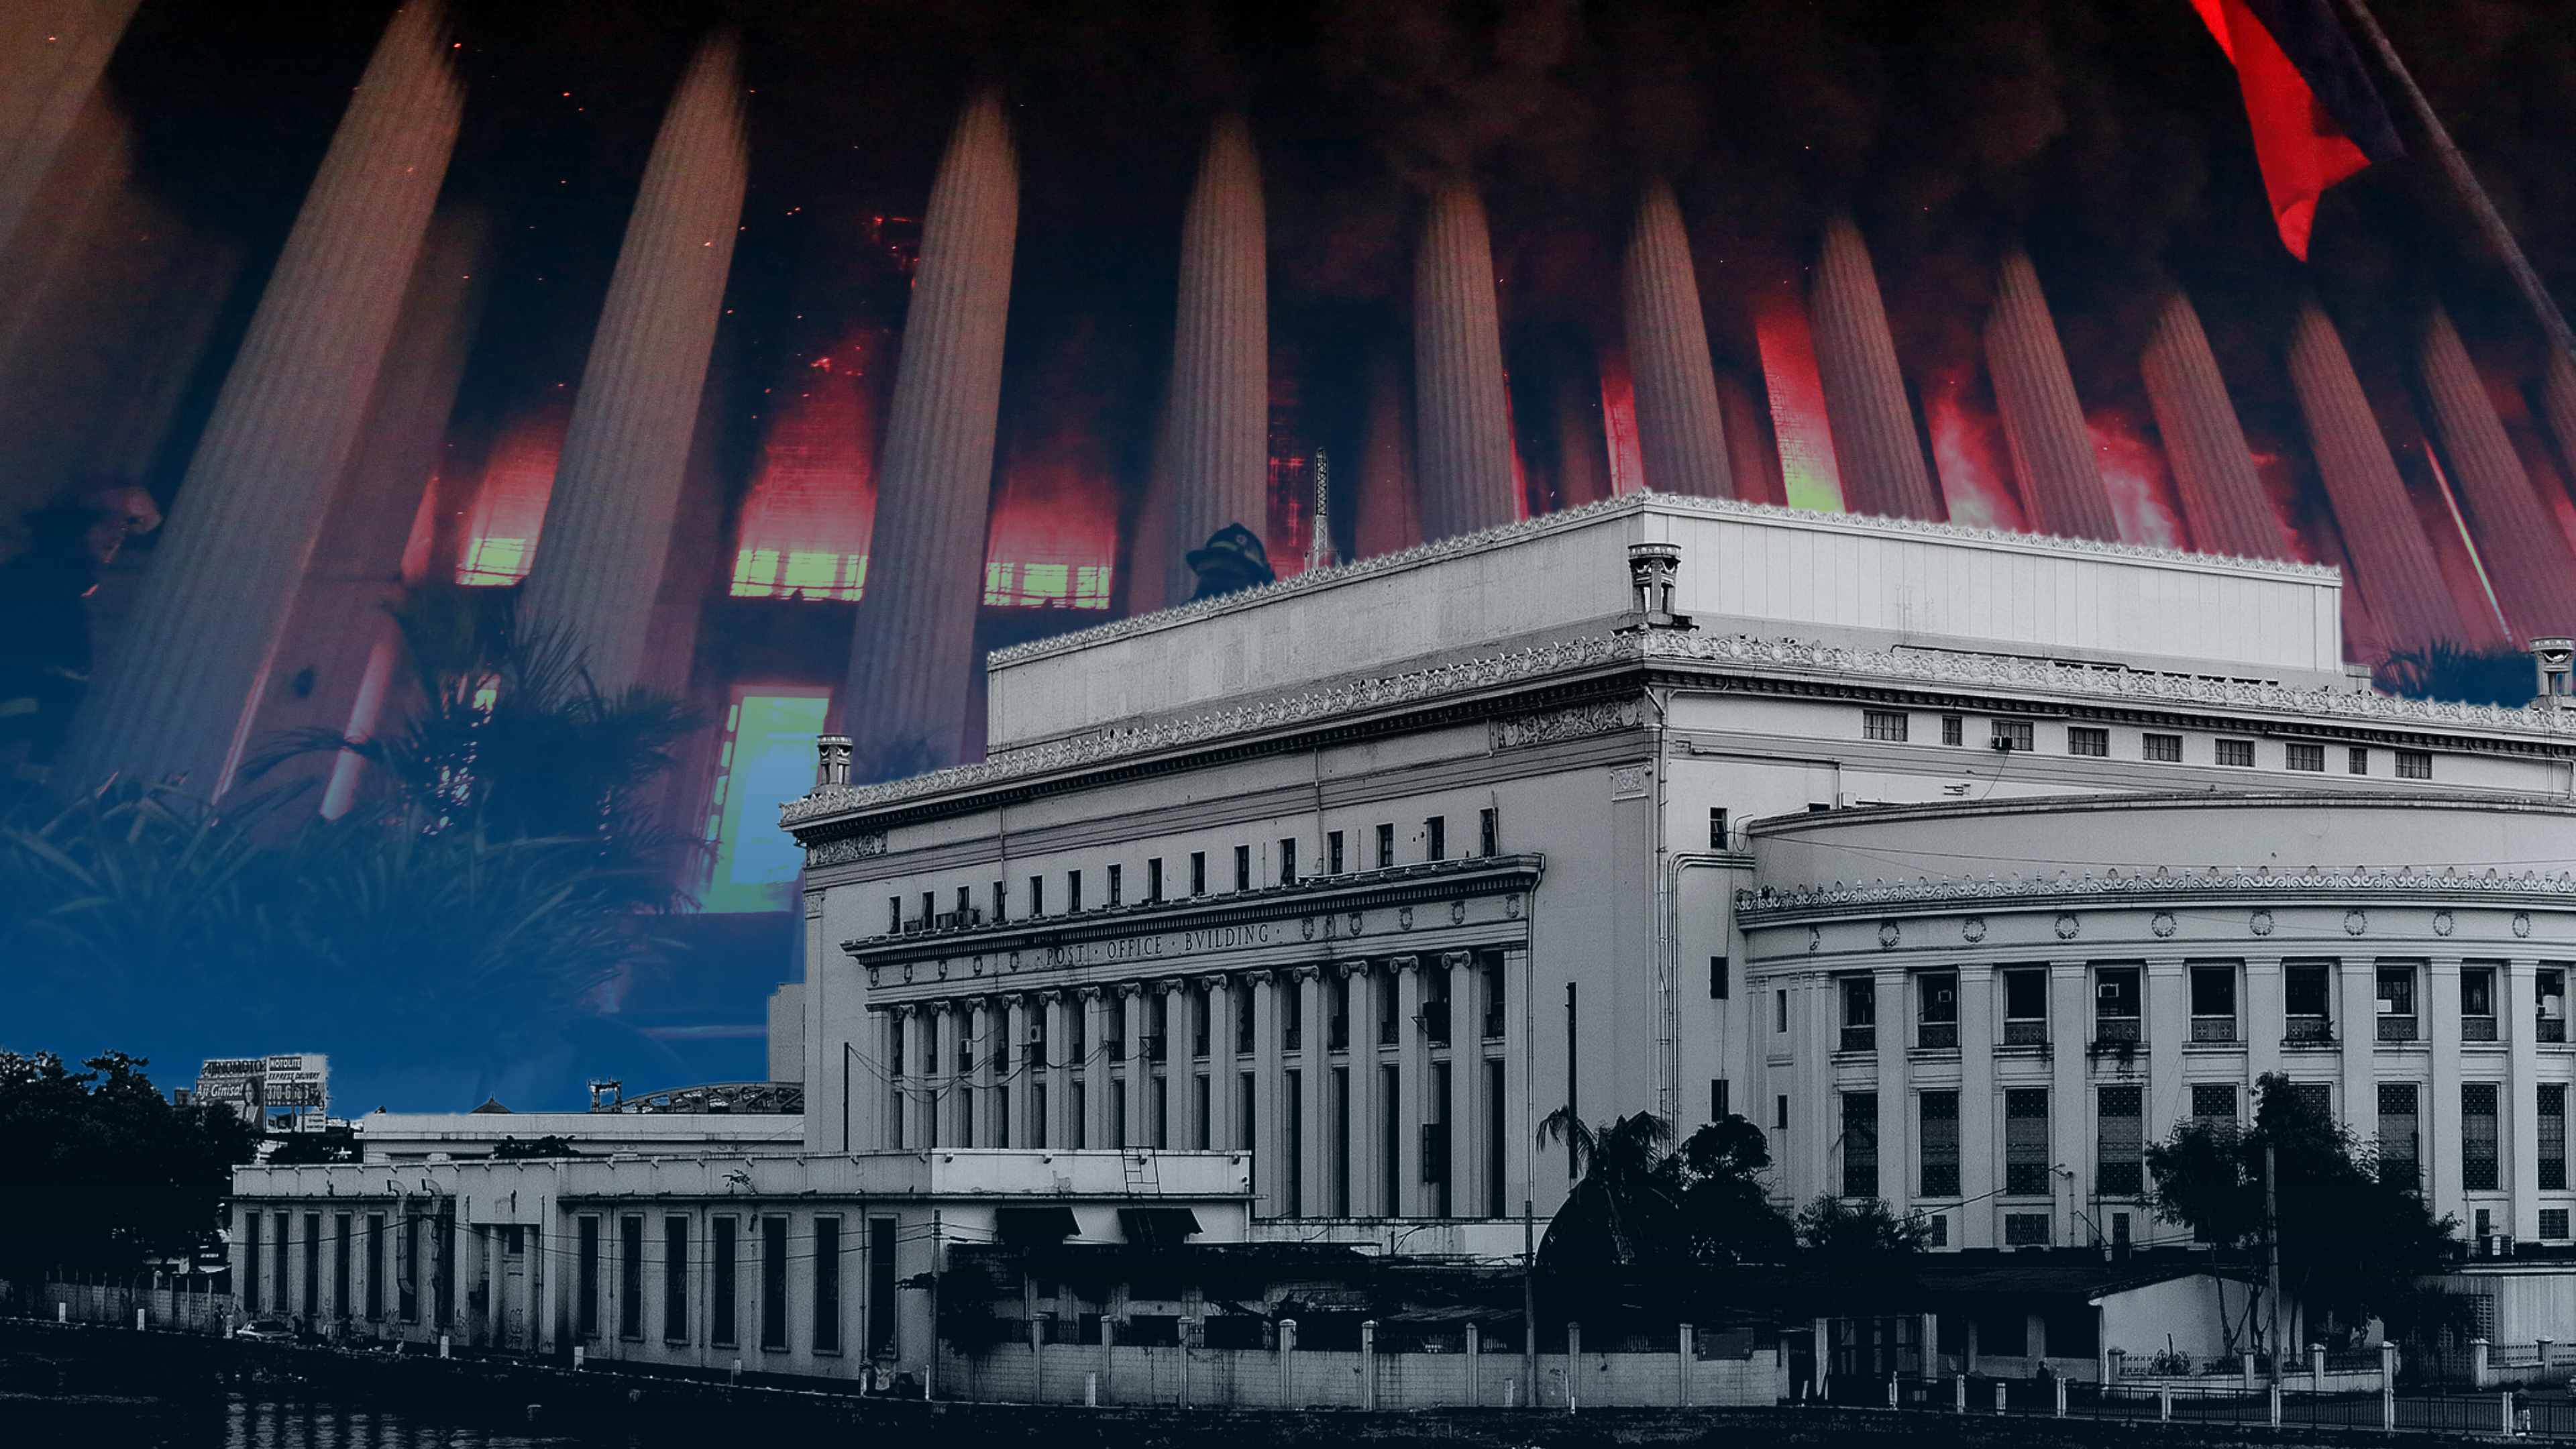 Manila Central Post Office: Fire can’t destroy its future